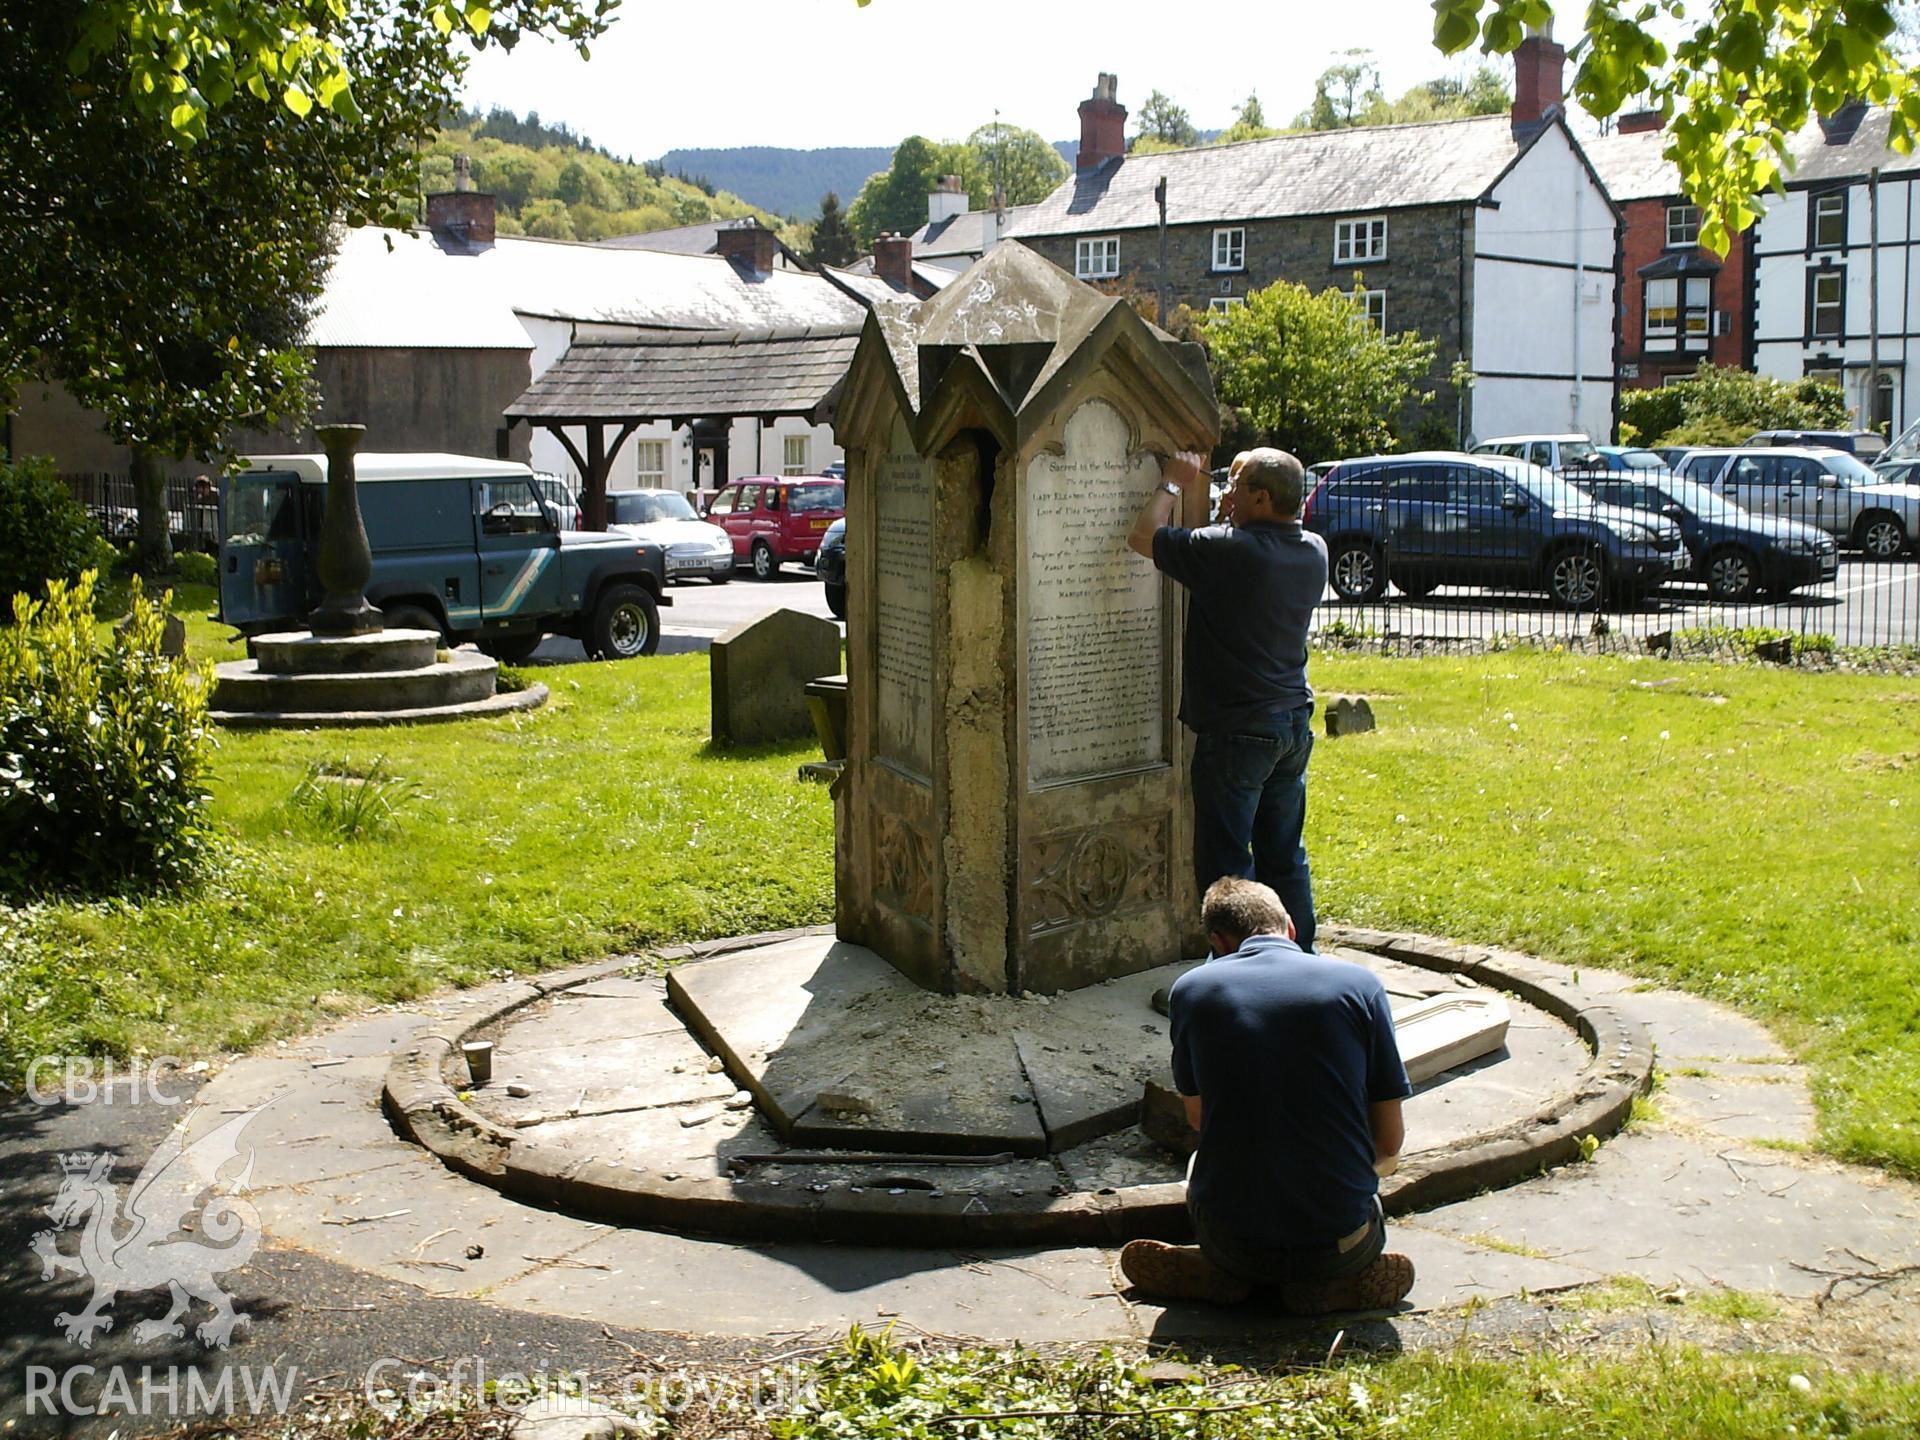 Digital image showing the memorial plaques being removed.